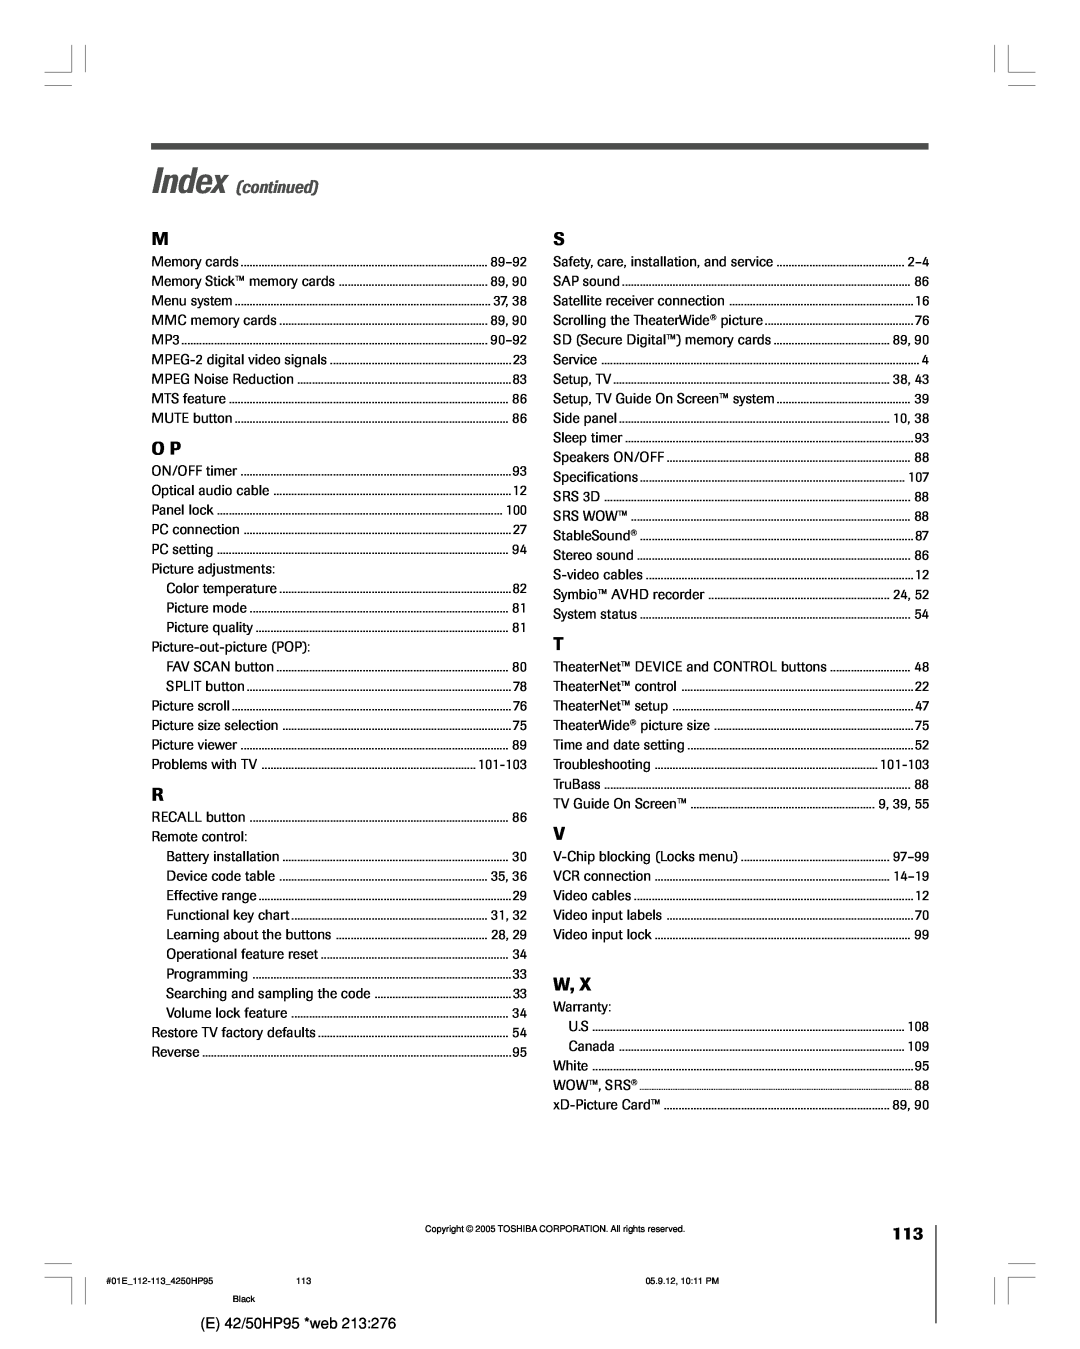 Toshiba 42HP95 owner manual Index continued 